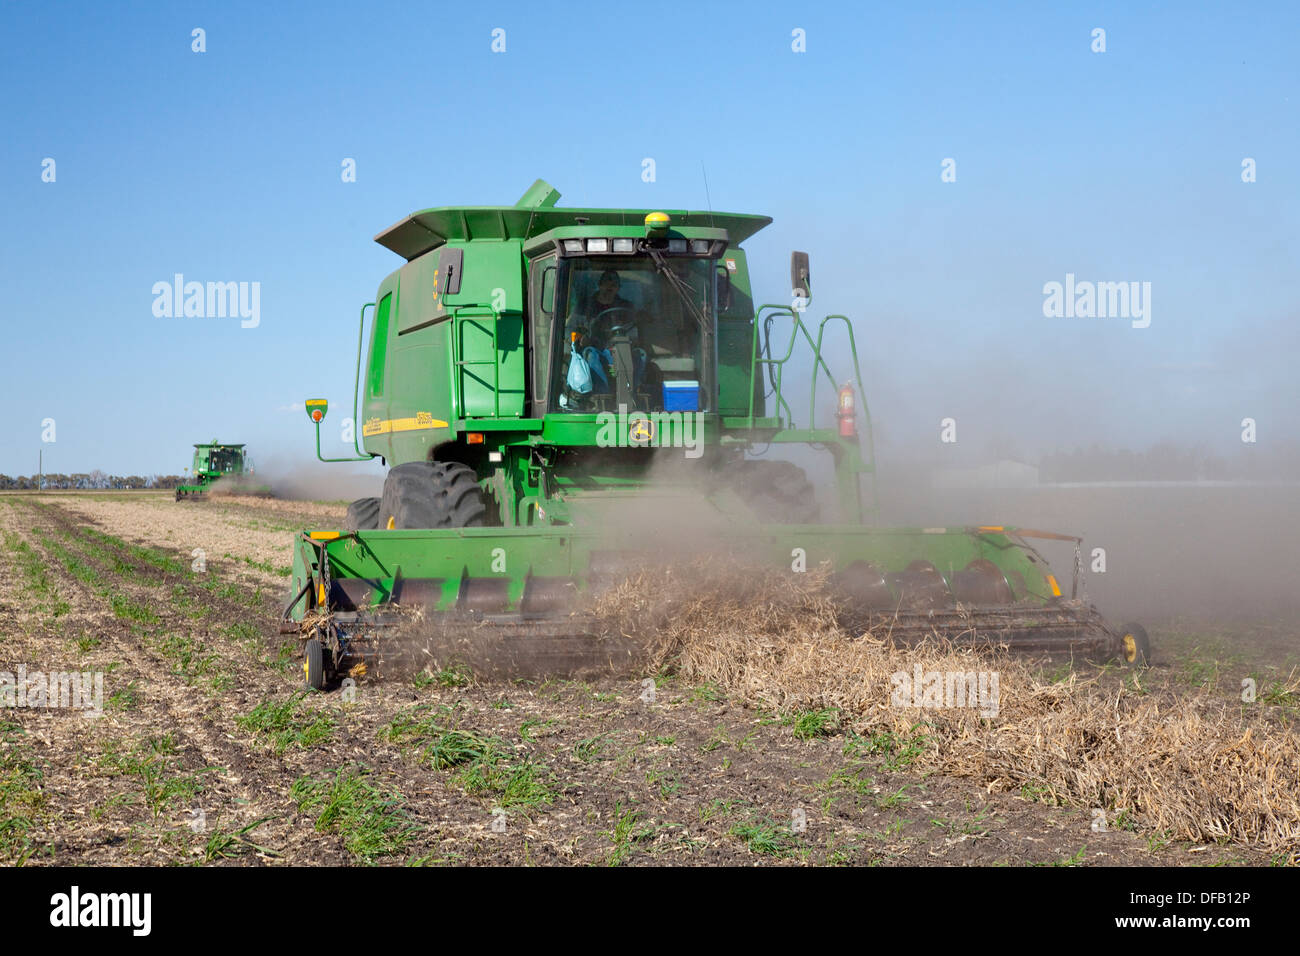 Harvesting beans at the Froese farm near Winkler Manitoba, Canada Stock Photo